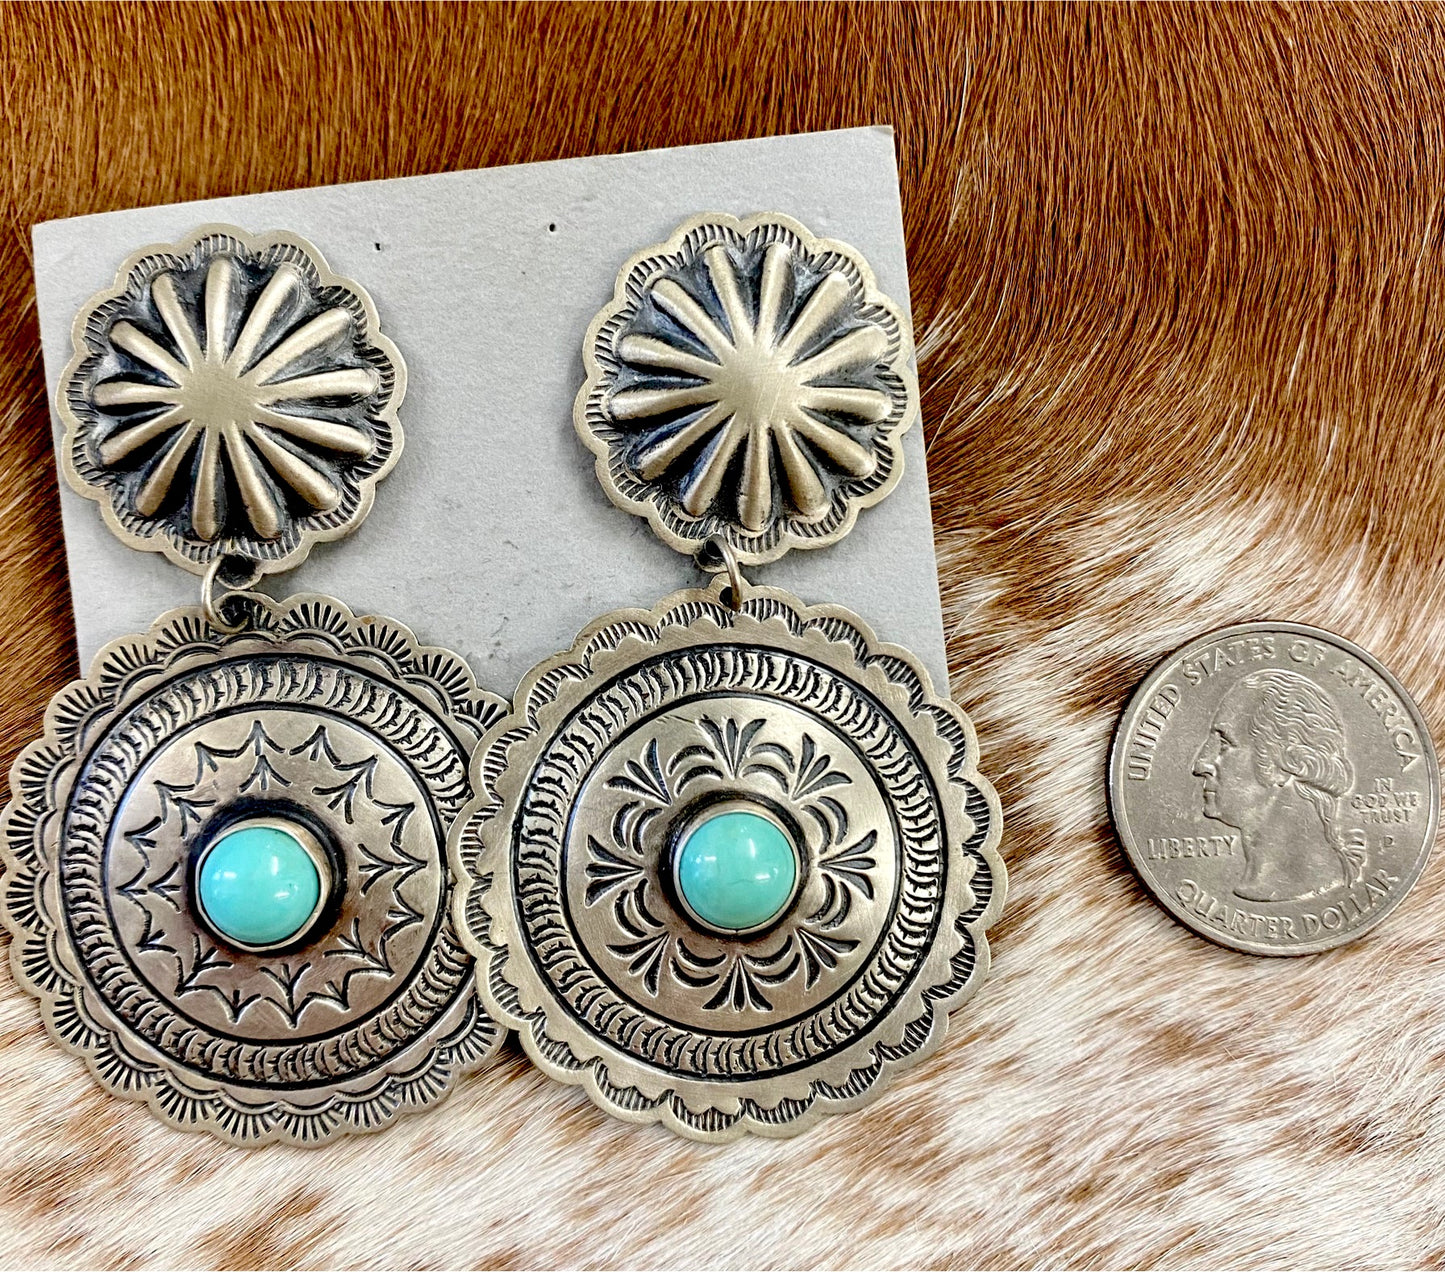 The Harris Joe Concho Turquoise Earrings - Ny Texas Style Boutique Sterling silver double Concho beautiful silver stamped earrings with turquoise stones in the center. Post large statement piece earrings that are stamped sterling and signed Harris Joe by Native American artist silversmith Harris Joe. These earrings will make a statement when paired with any outfit. 